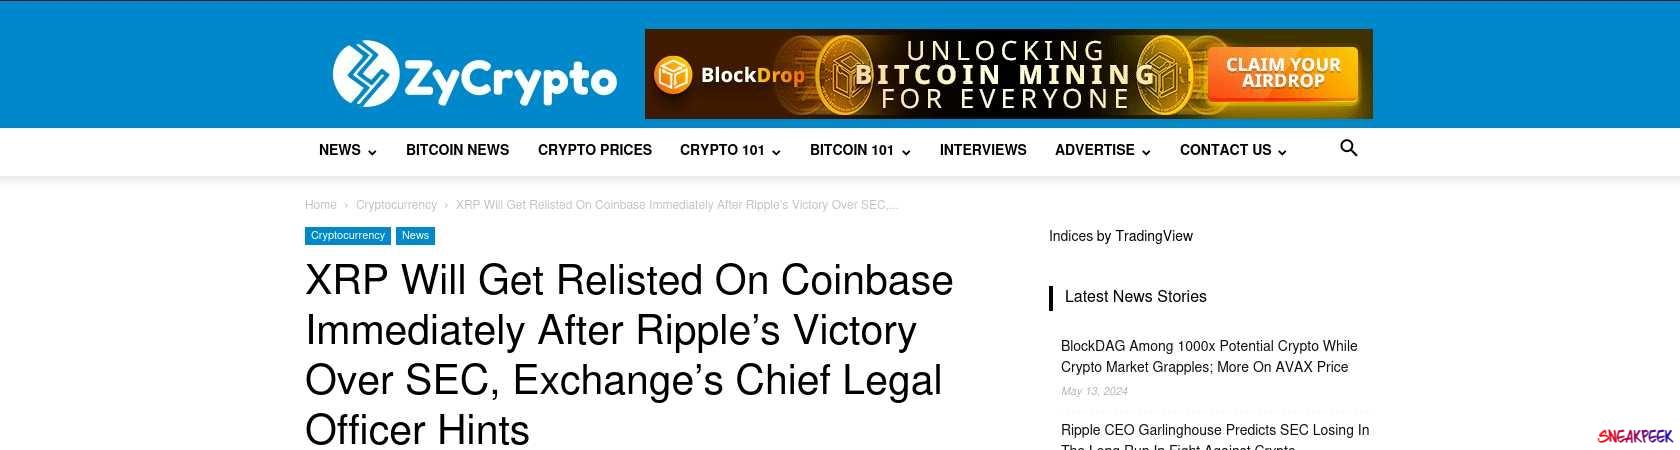 Read the full Article:  ⭲ XRP Will Get Relisted On Coinbase Immediately After Ripple’s Victory Over SEC, Exchange’s Chief Legal Officer Hints